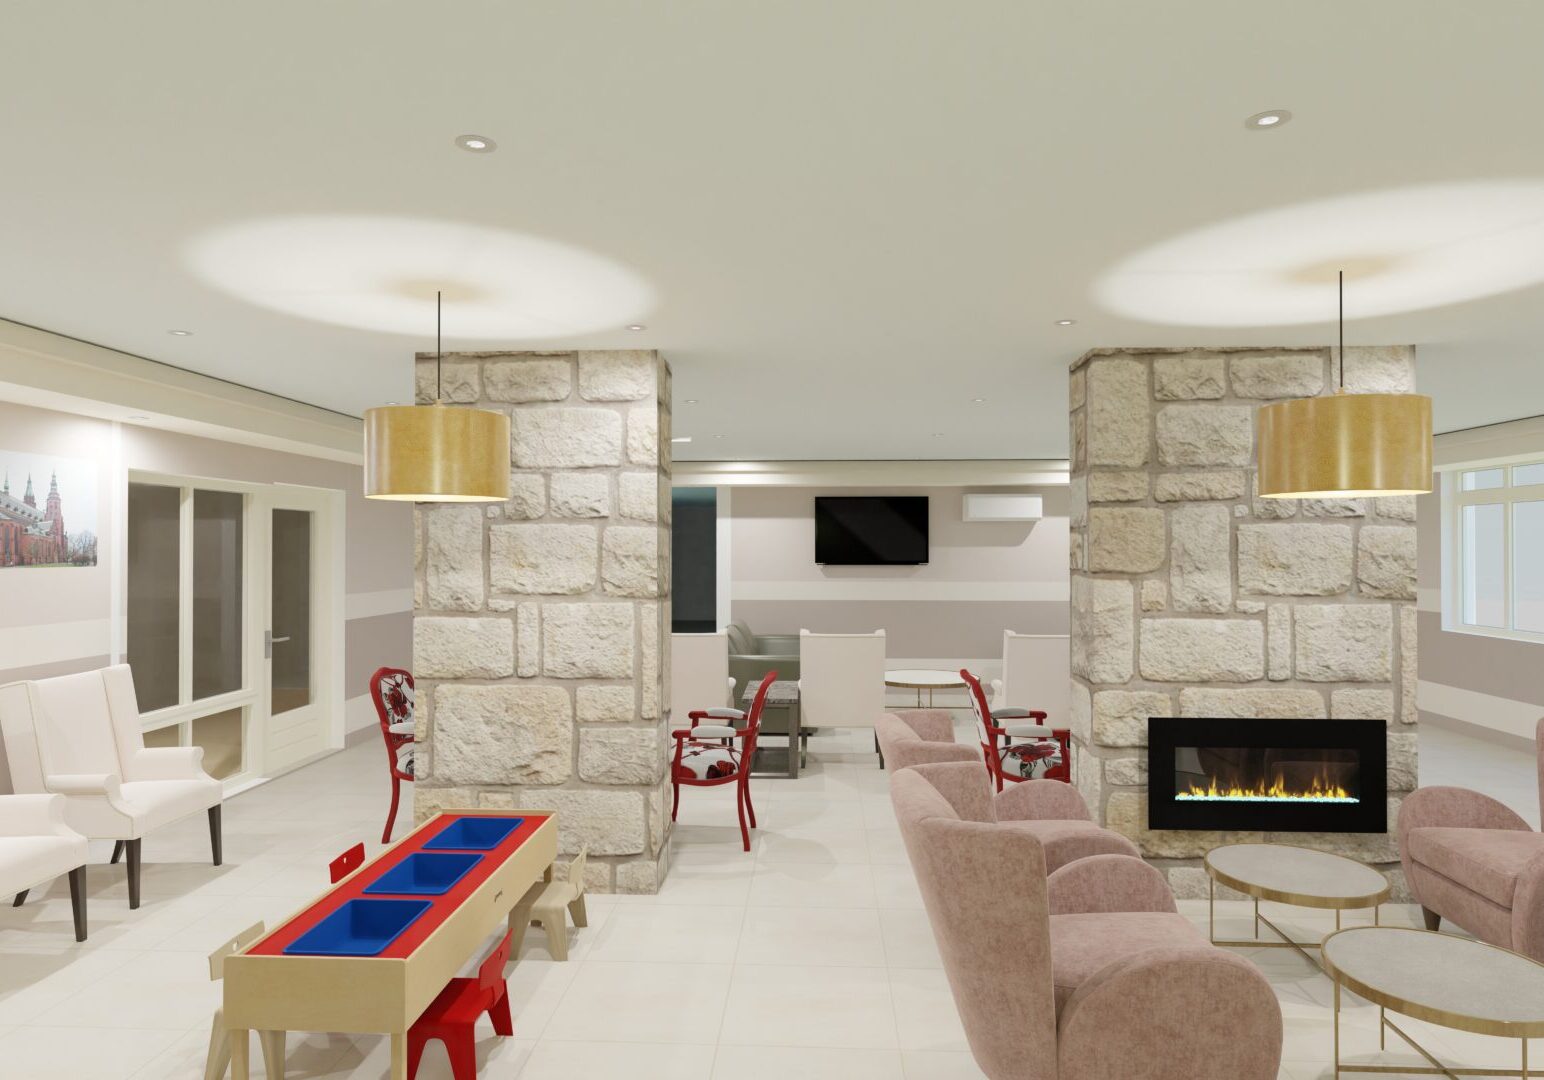 A living room with stone walls and a fireplace.